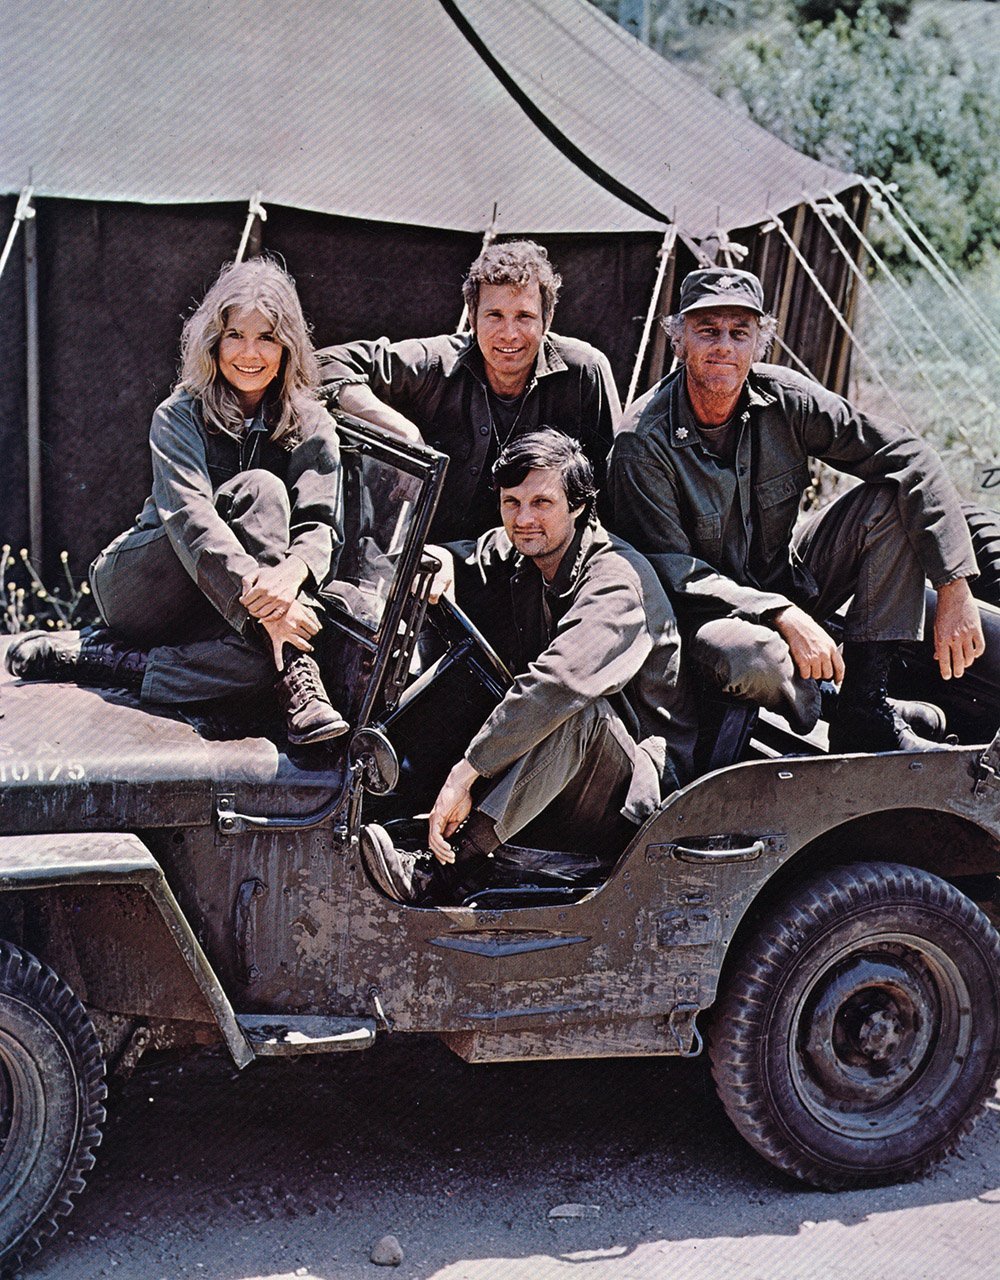 Alan Alda and the rest of the main cast of "M.A.S.H." I Photo: Getty Images.